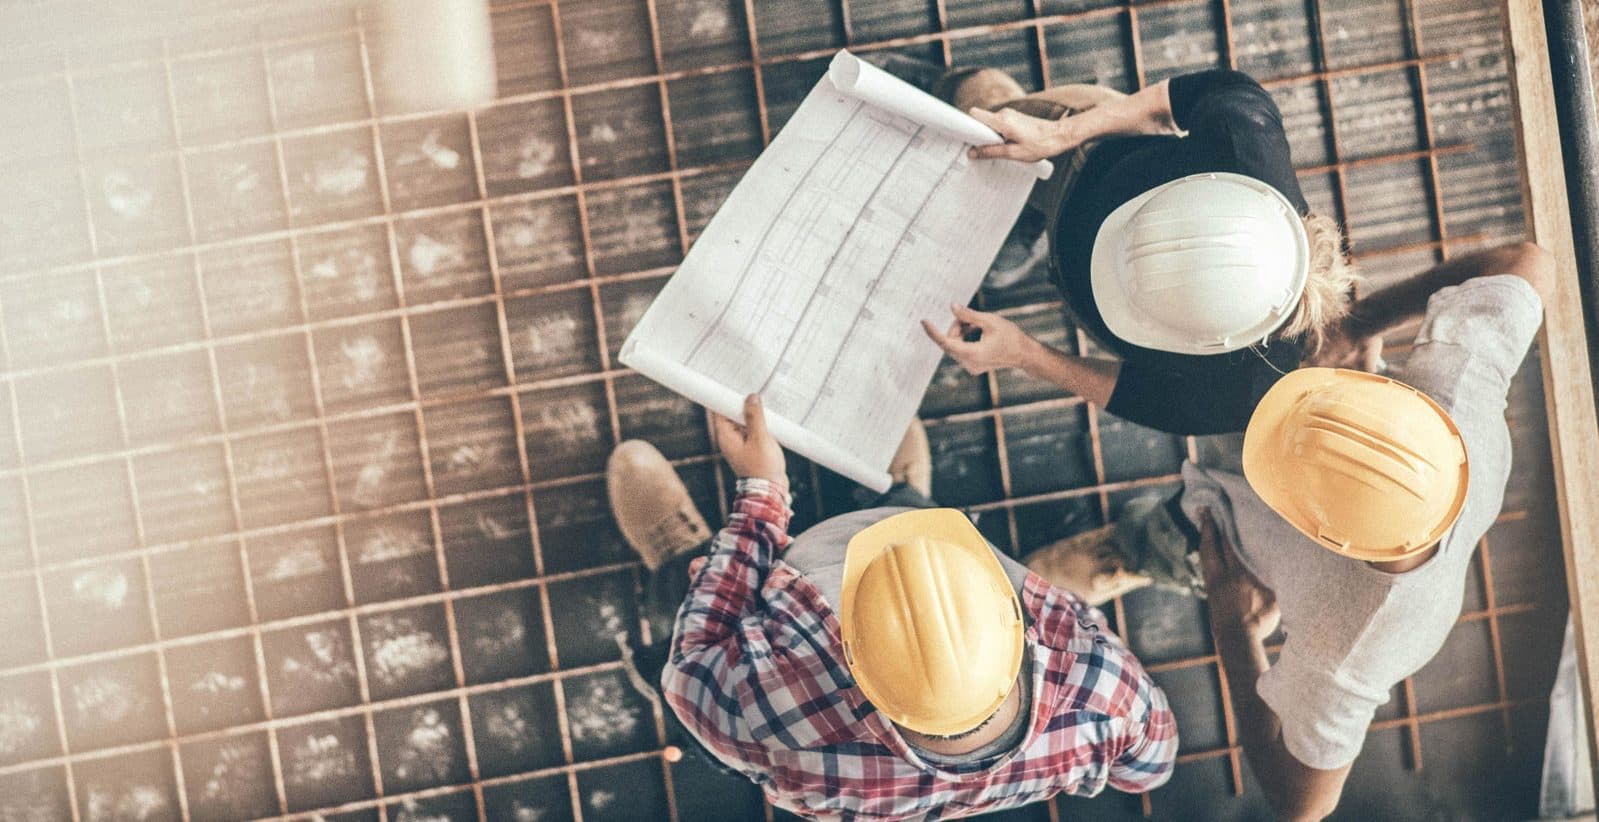 The 8 Trends You Need To Know About The Skilled Worker Shortage in 2020